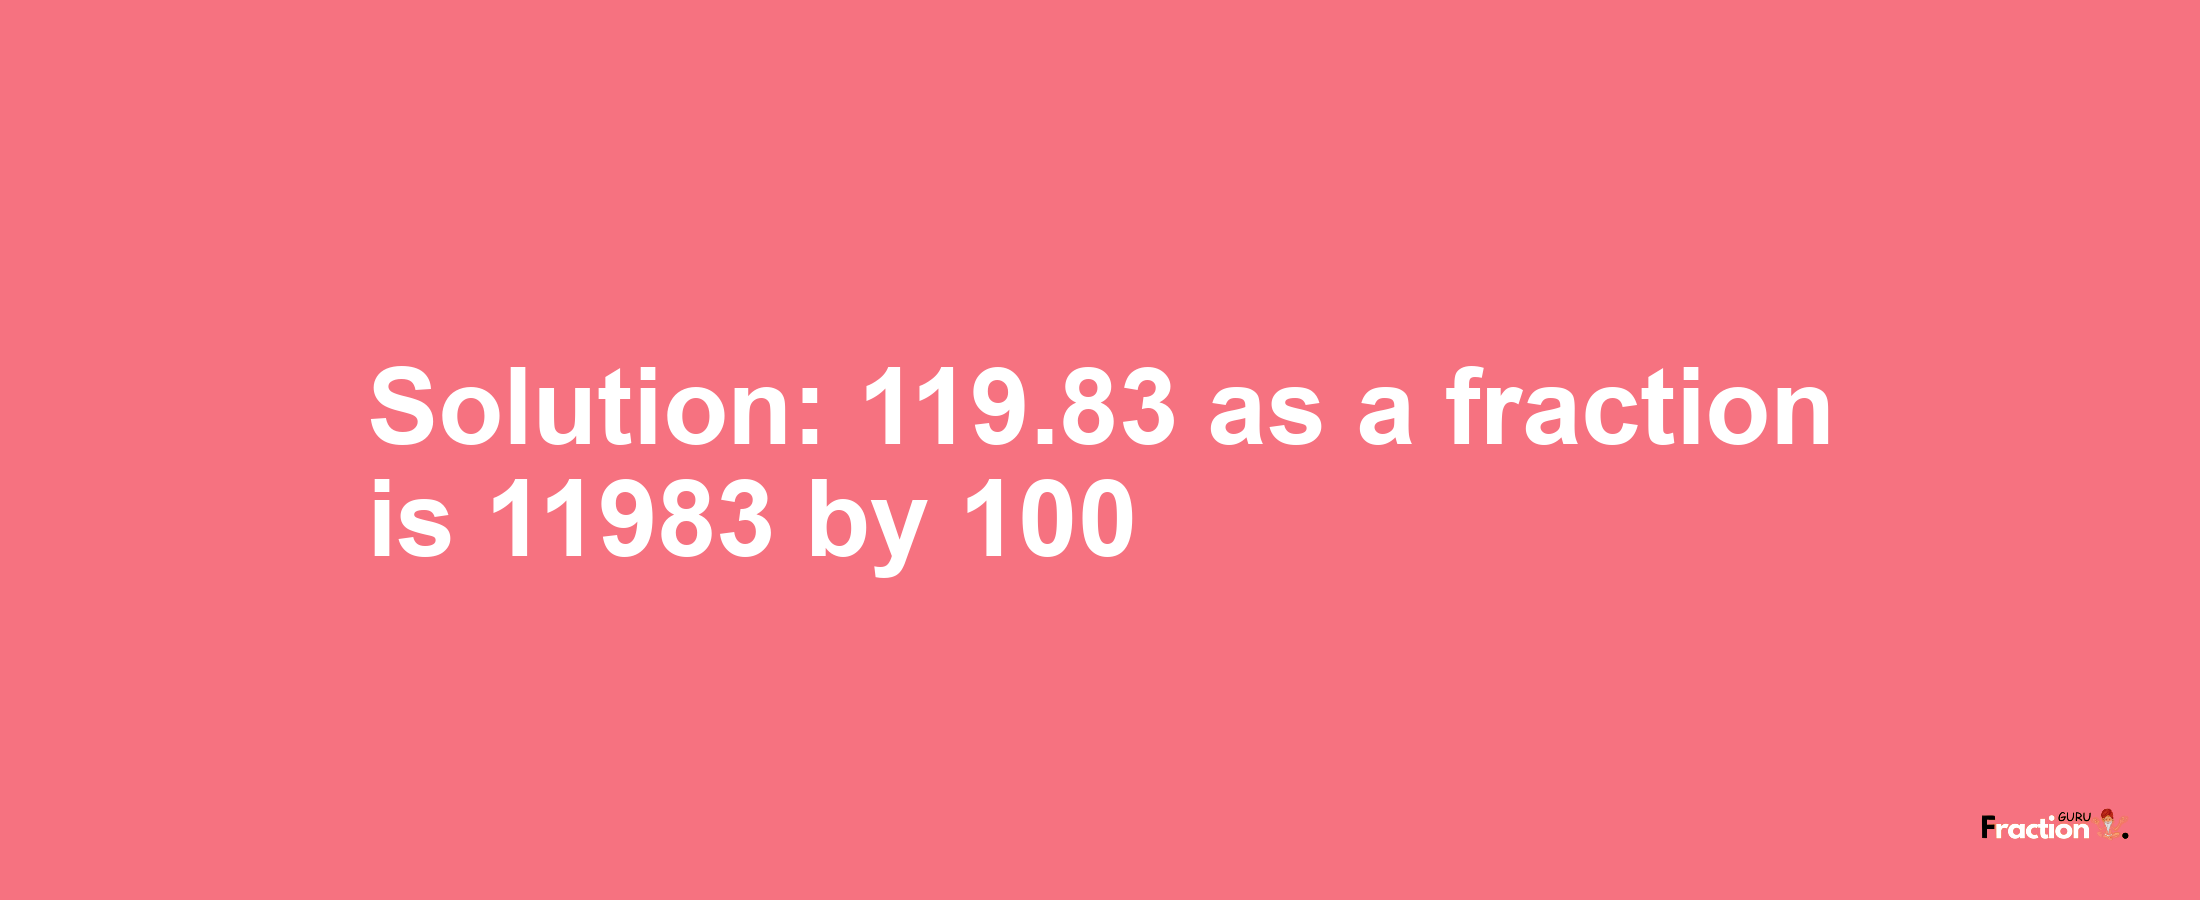 Solution:119.83 as a fraction is 11983/100